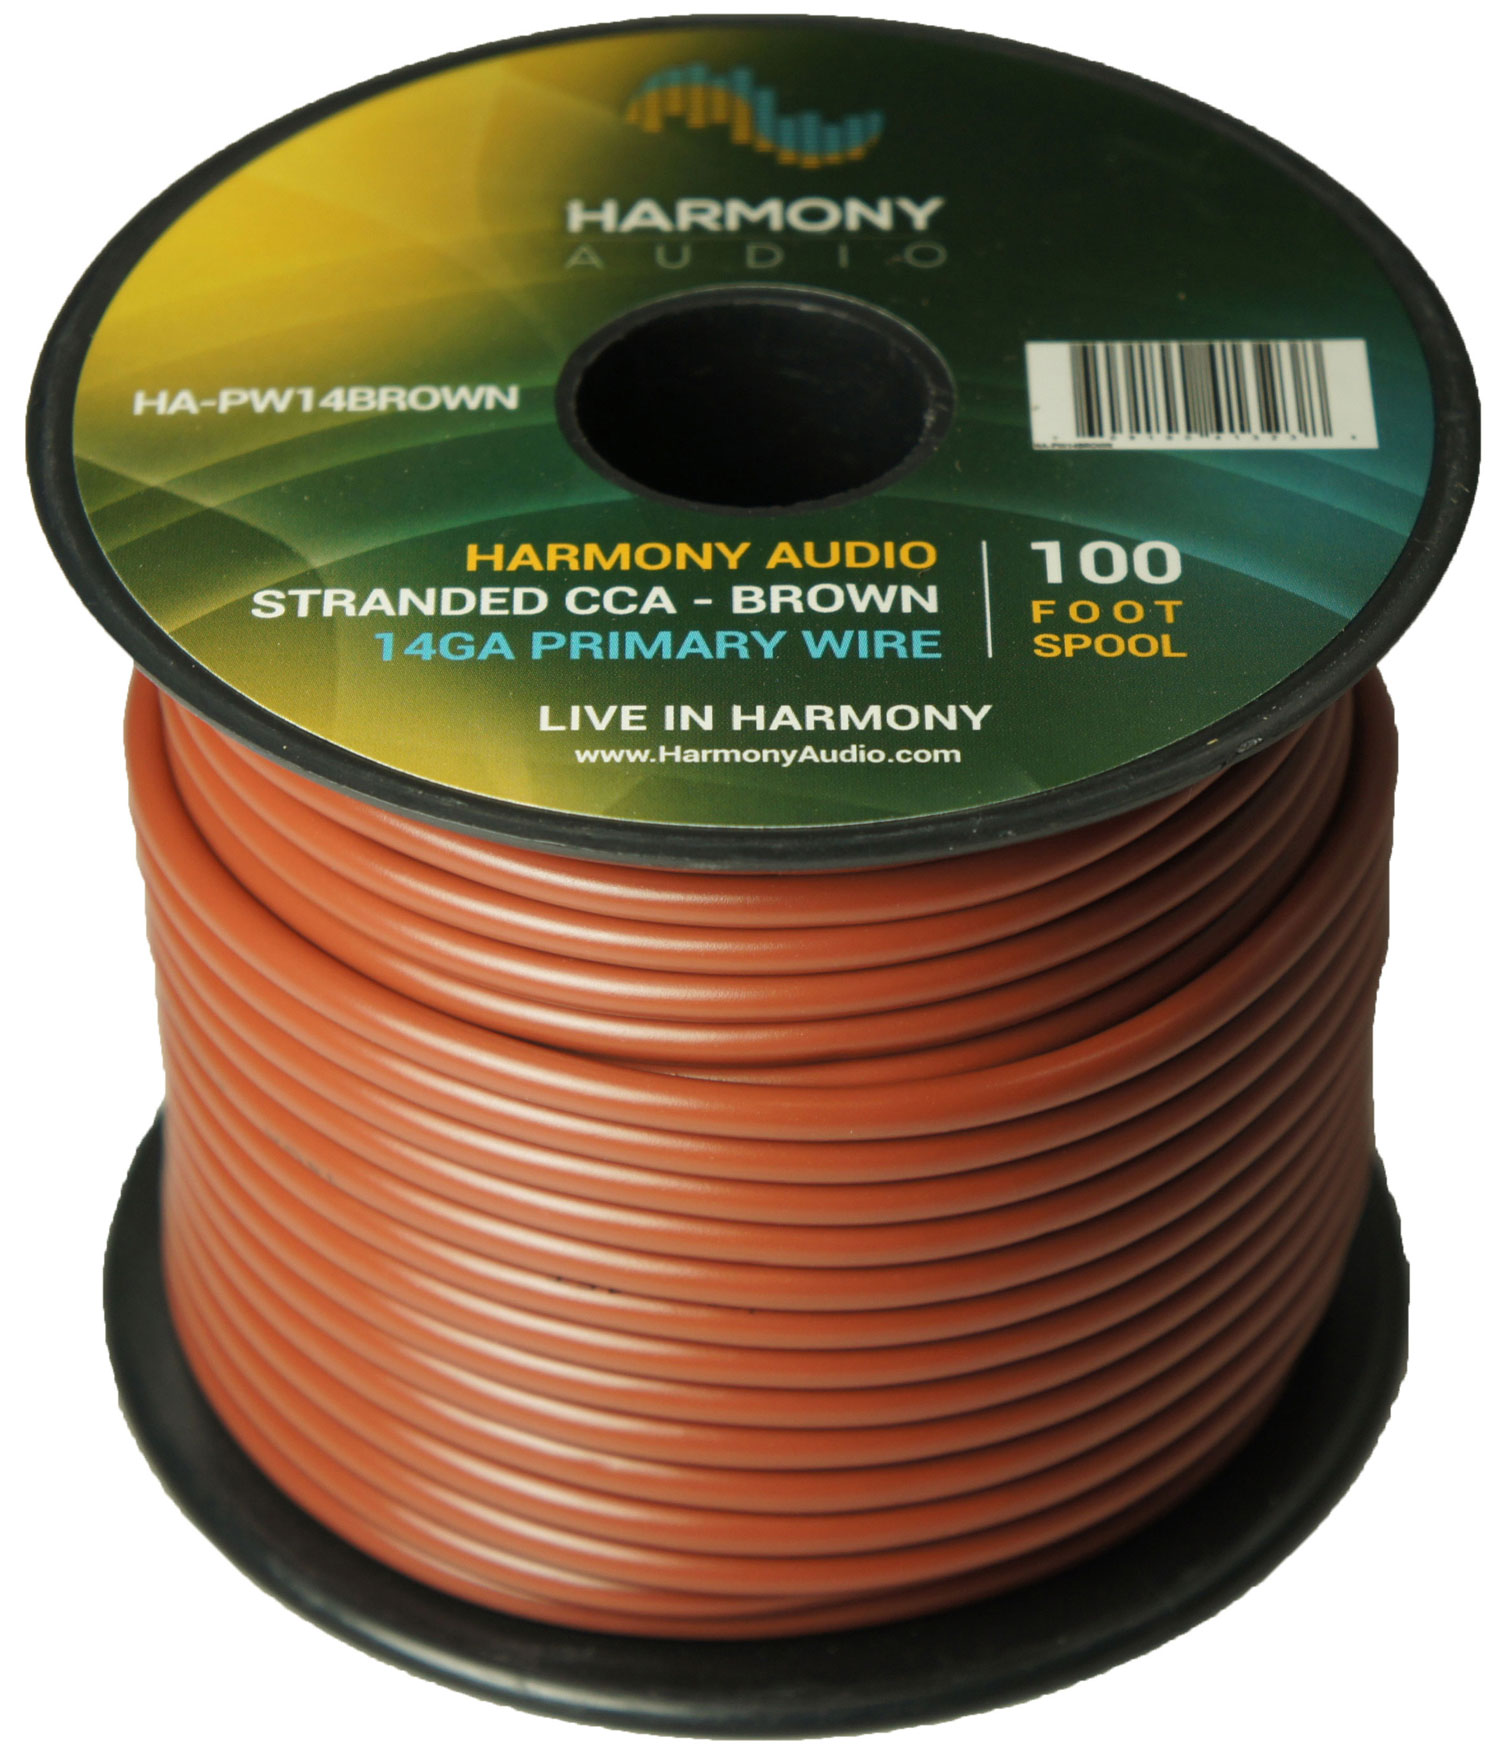 Harmony Audio HA-PW14BROWN Primary Single Conductor 14 Gauge Brown Power or Ground Wire Roll 100 Feet Cable for Car Audio / Trailer / Model Train / Remote